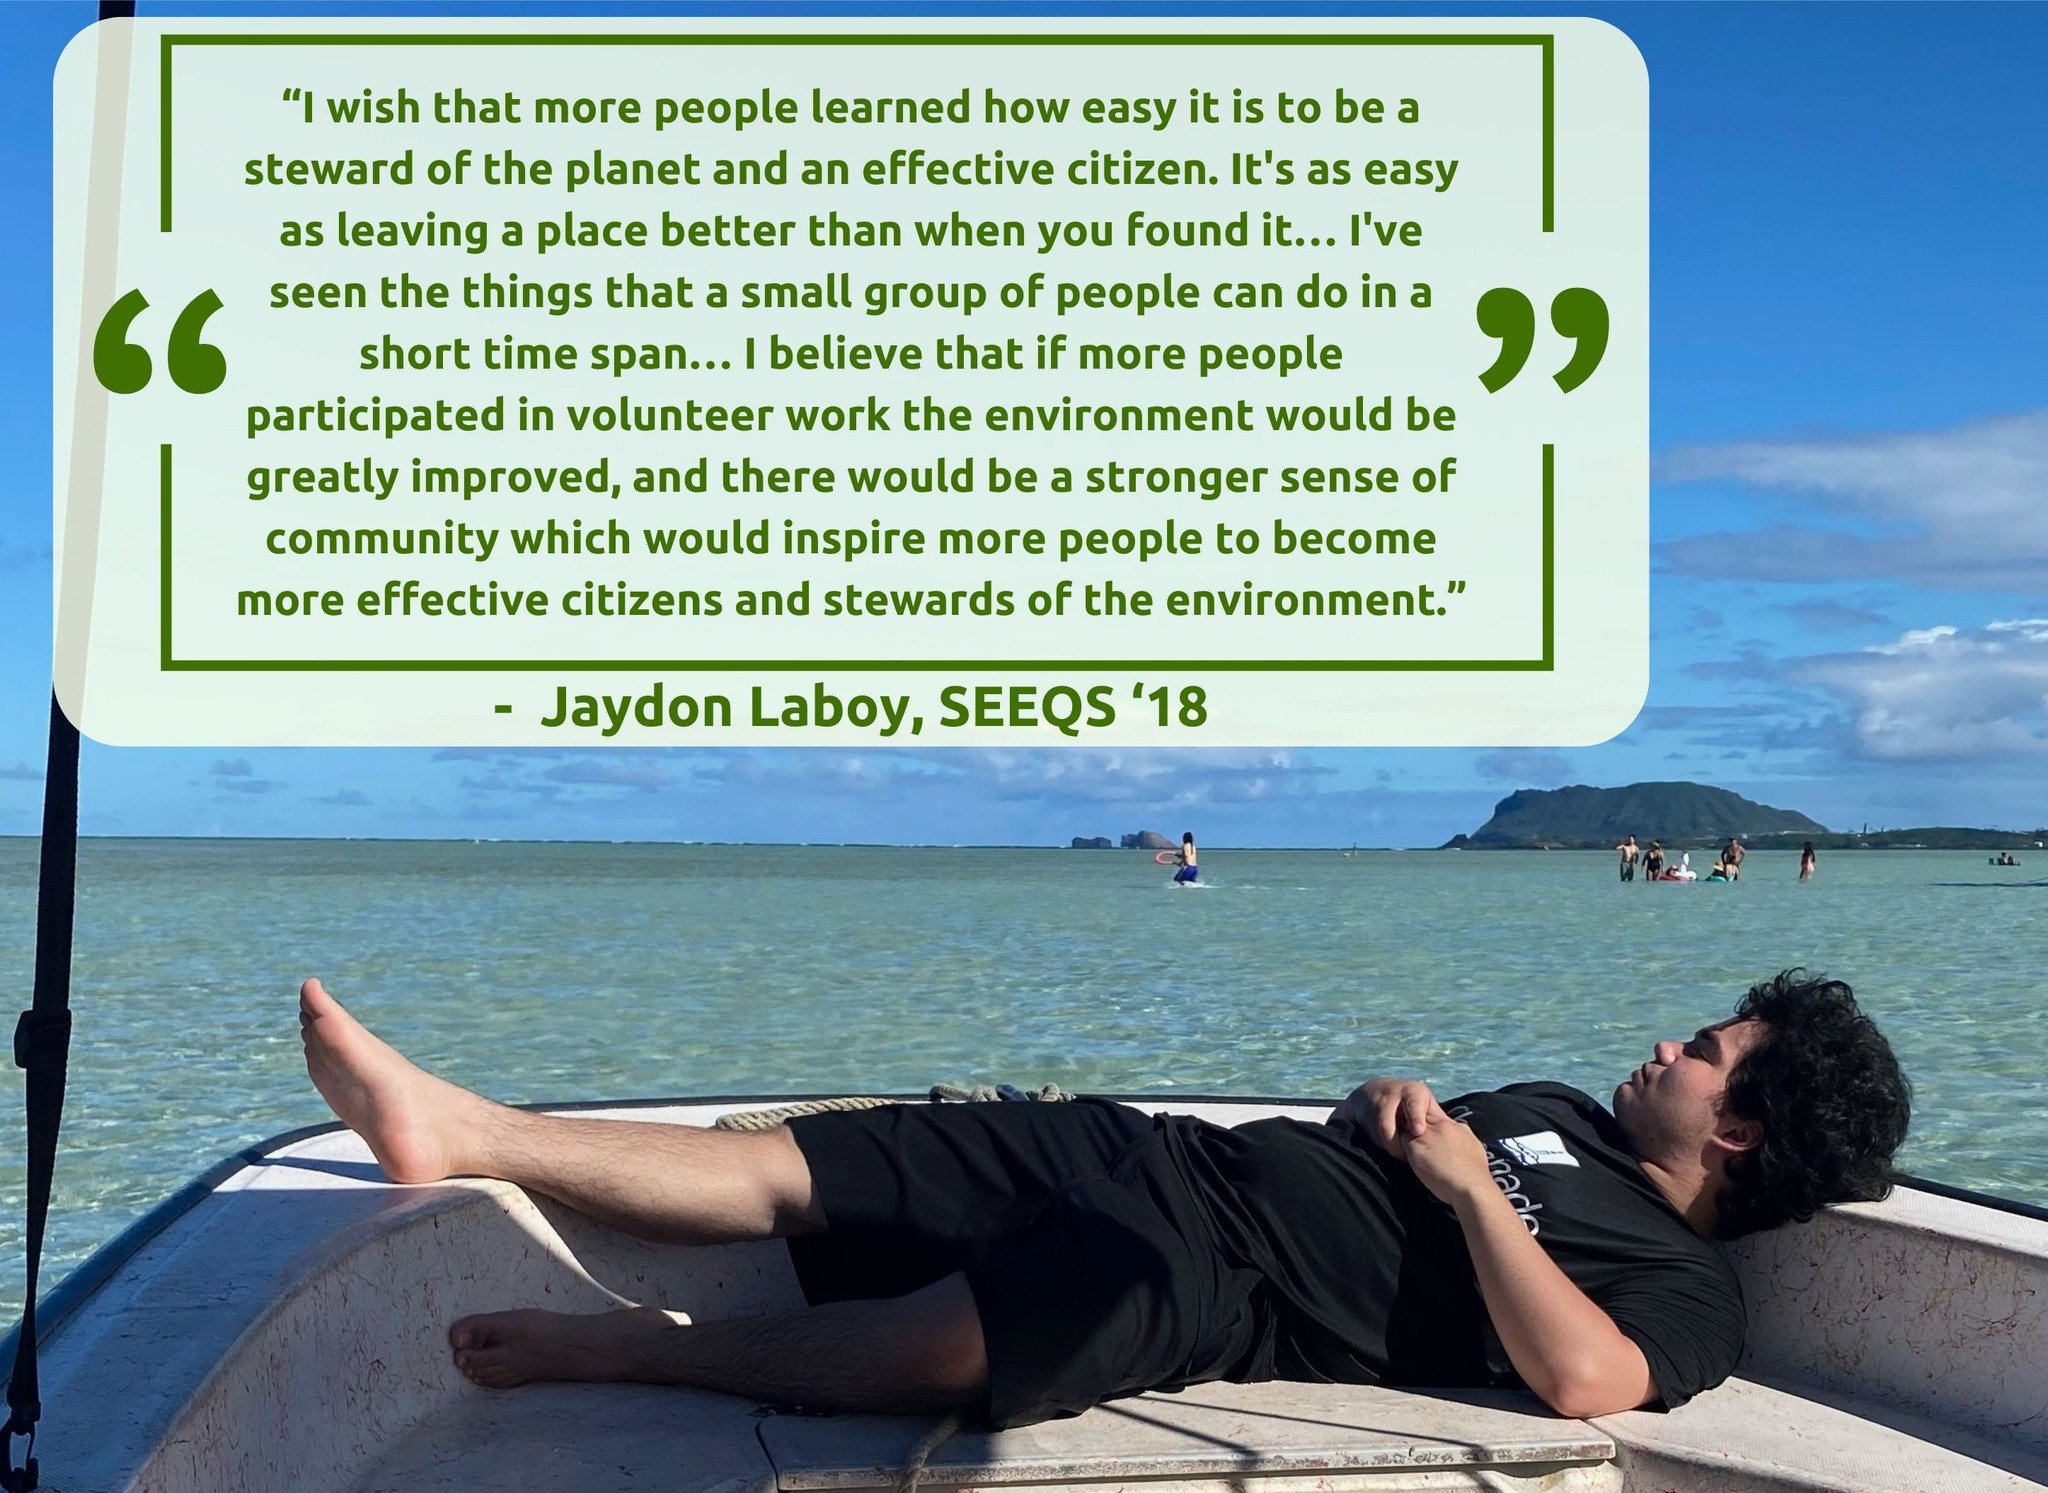 Jaydon inspires us to keep matching our words with actions! We all have the ability to be stewards of our planet and take care of the place we call home. 
--
What do you wish more people knew about what it means to be a steward of planet Earth and a 